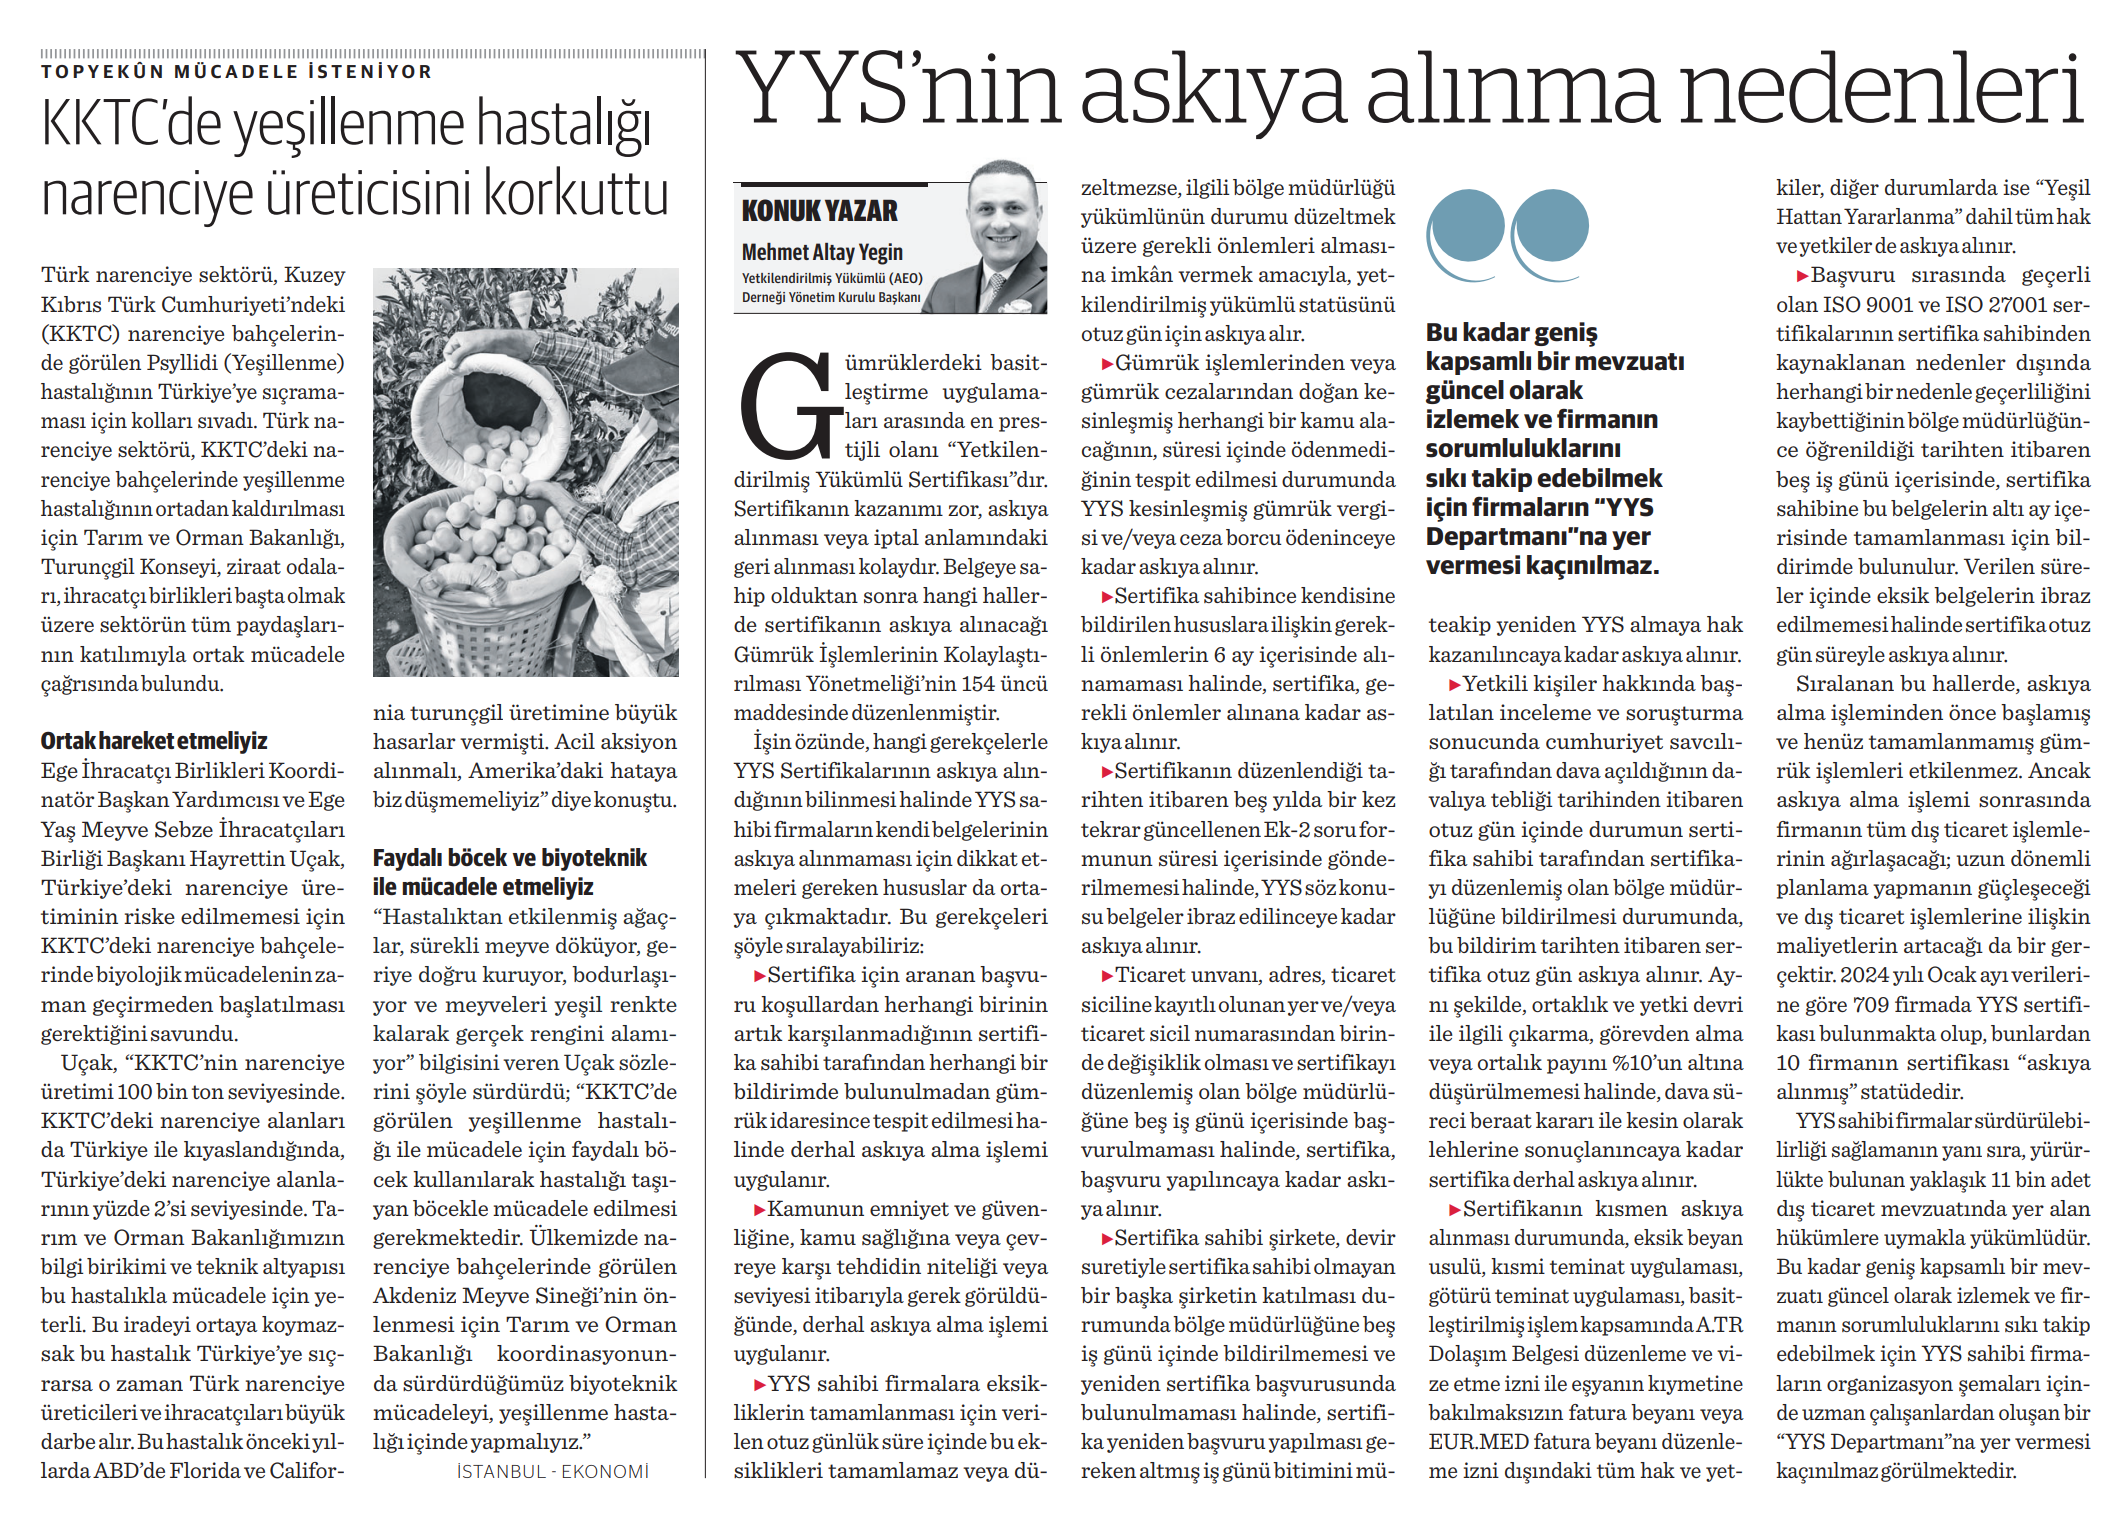 The article of our Chairman of the Board of Directors, Mehmet Altay YEGİN, titled "Reasons For Suspensıon of The YYS" was published in the "What kind of an Economy" newspaper?